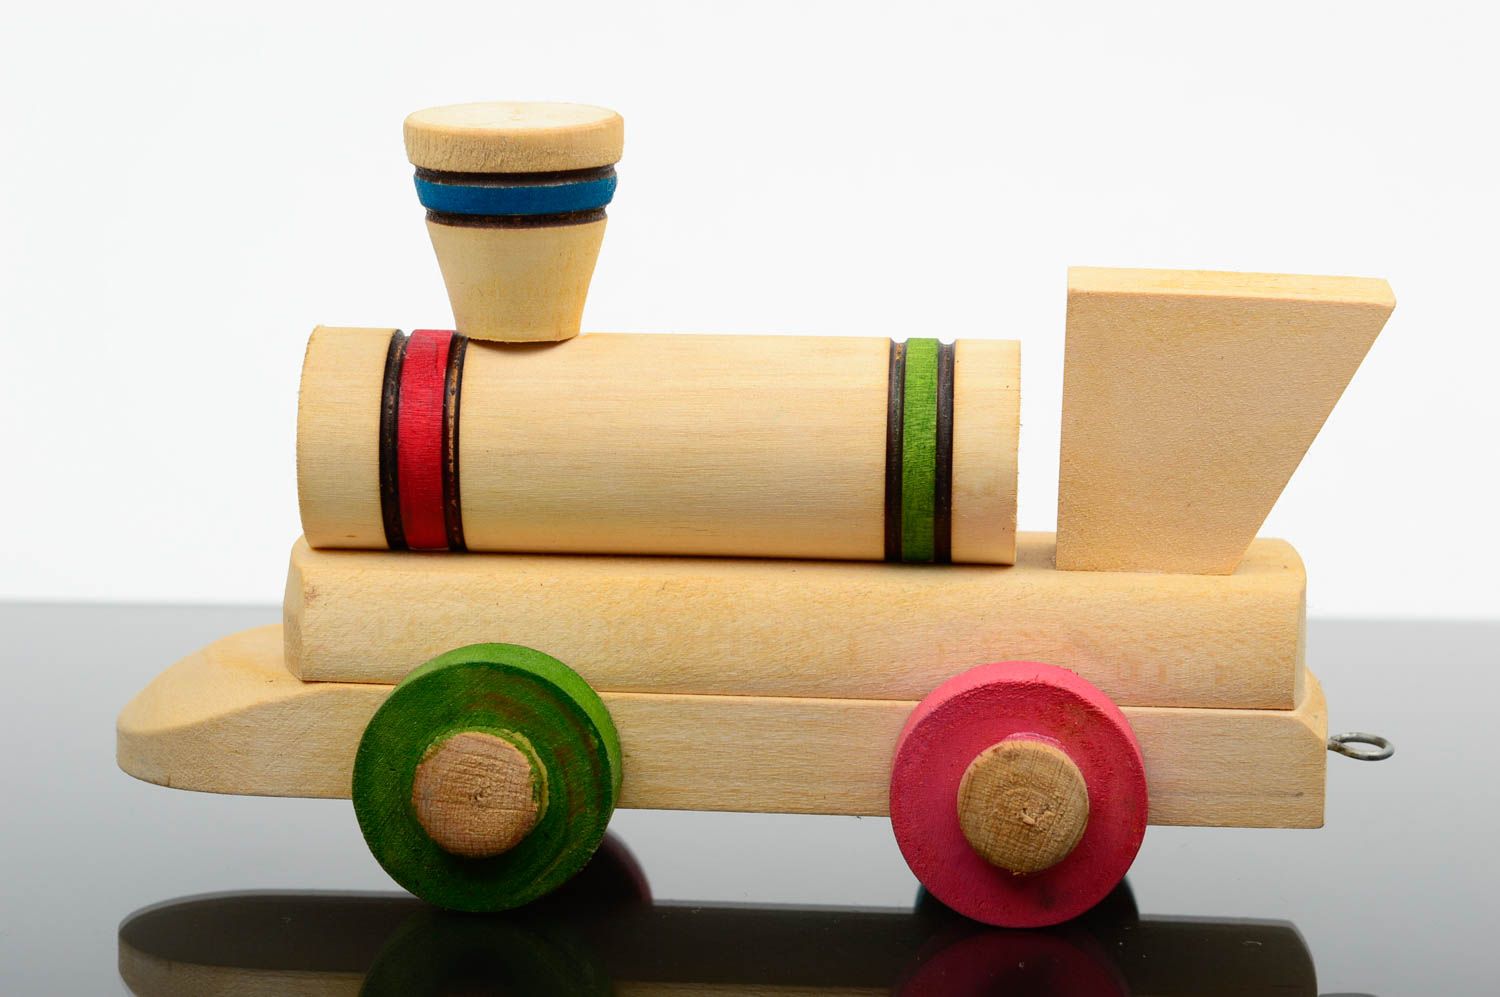 Wooden train toy handmade toy homemade home decor wooden gifts presents for kids photo 1